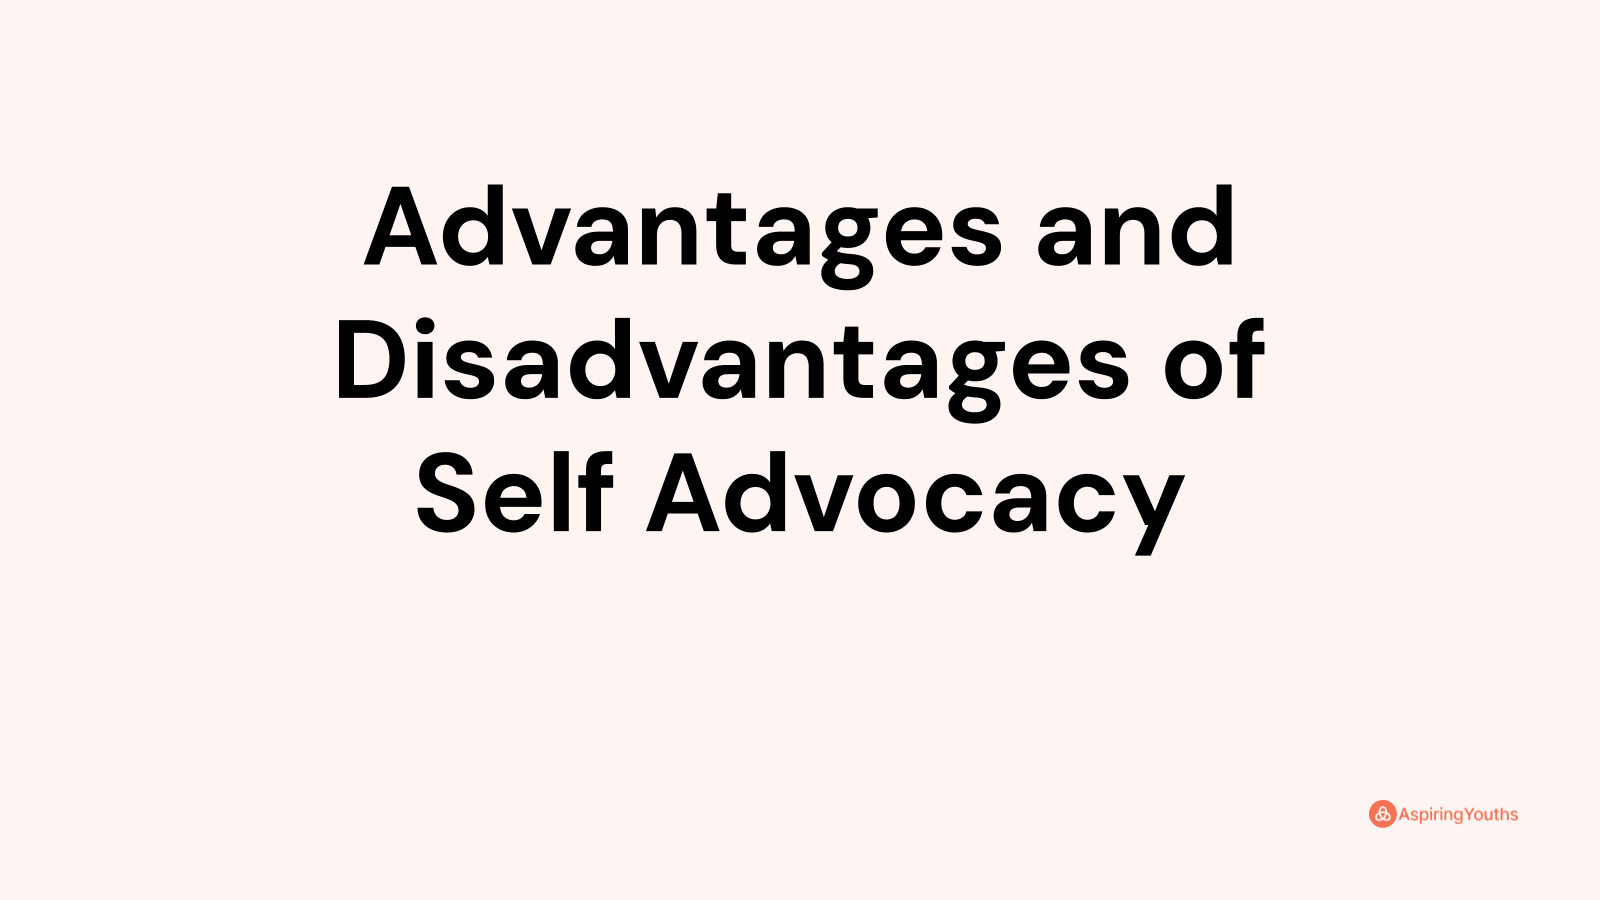 Advantages and disadvantages of Self Advocacy